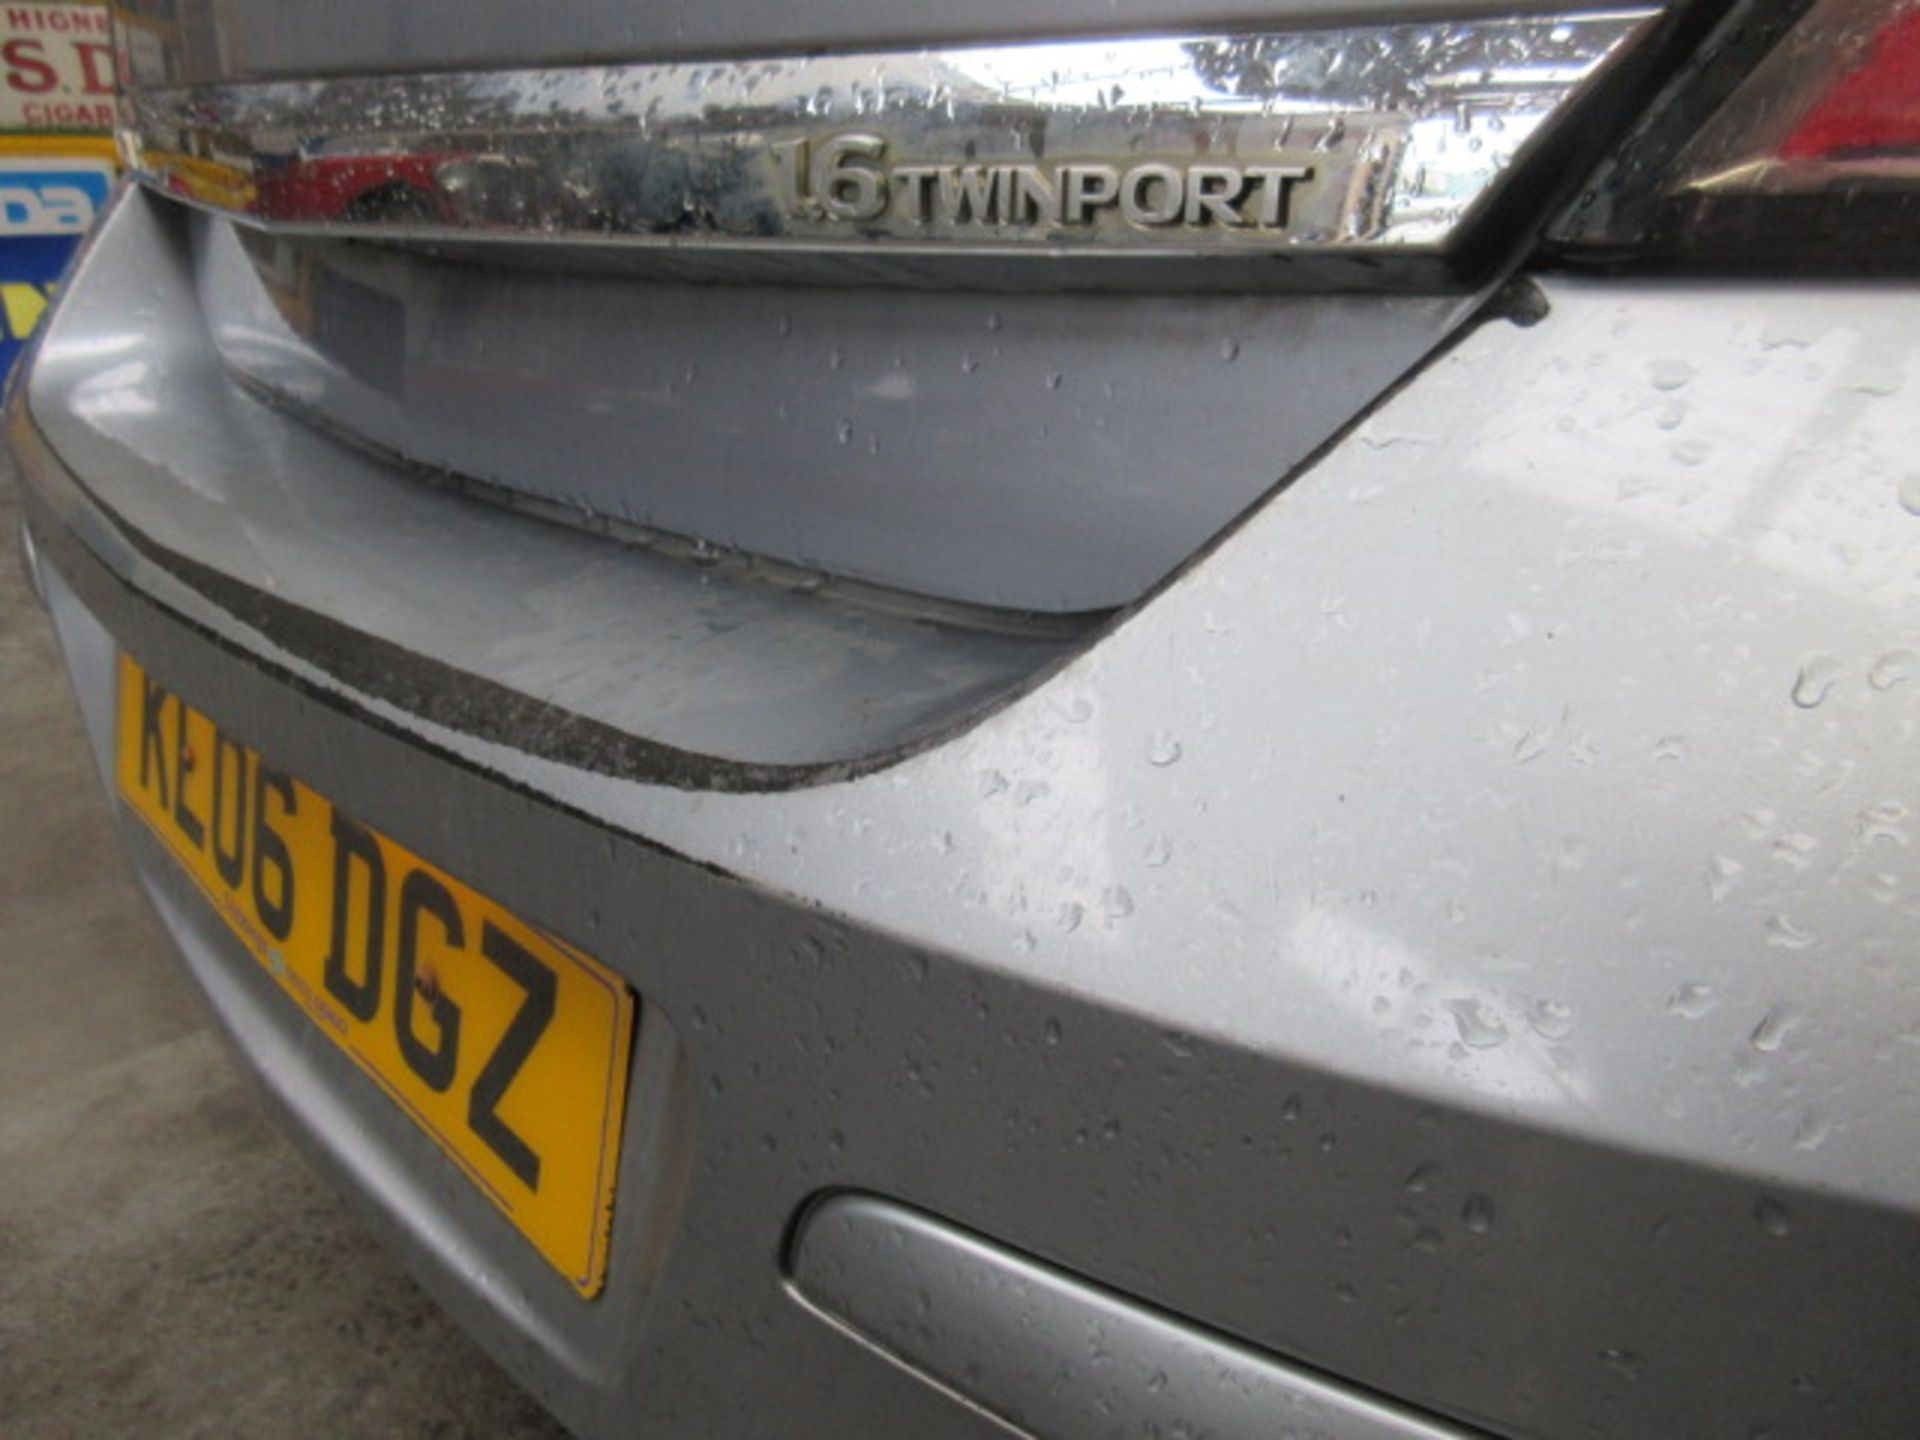 06 06 Vauxhall Astra Design Twinport - Image 11 of 24